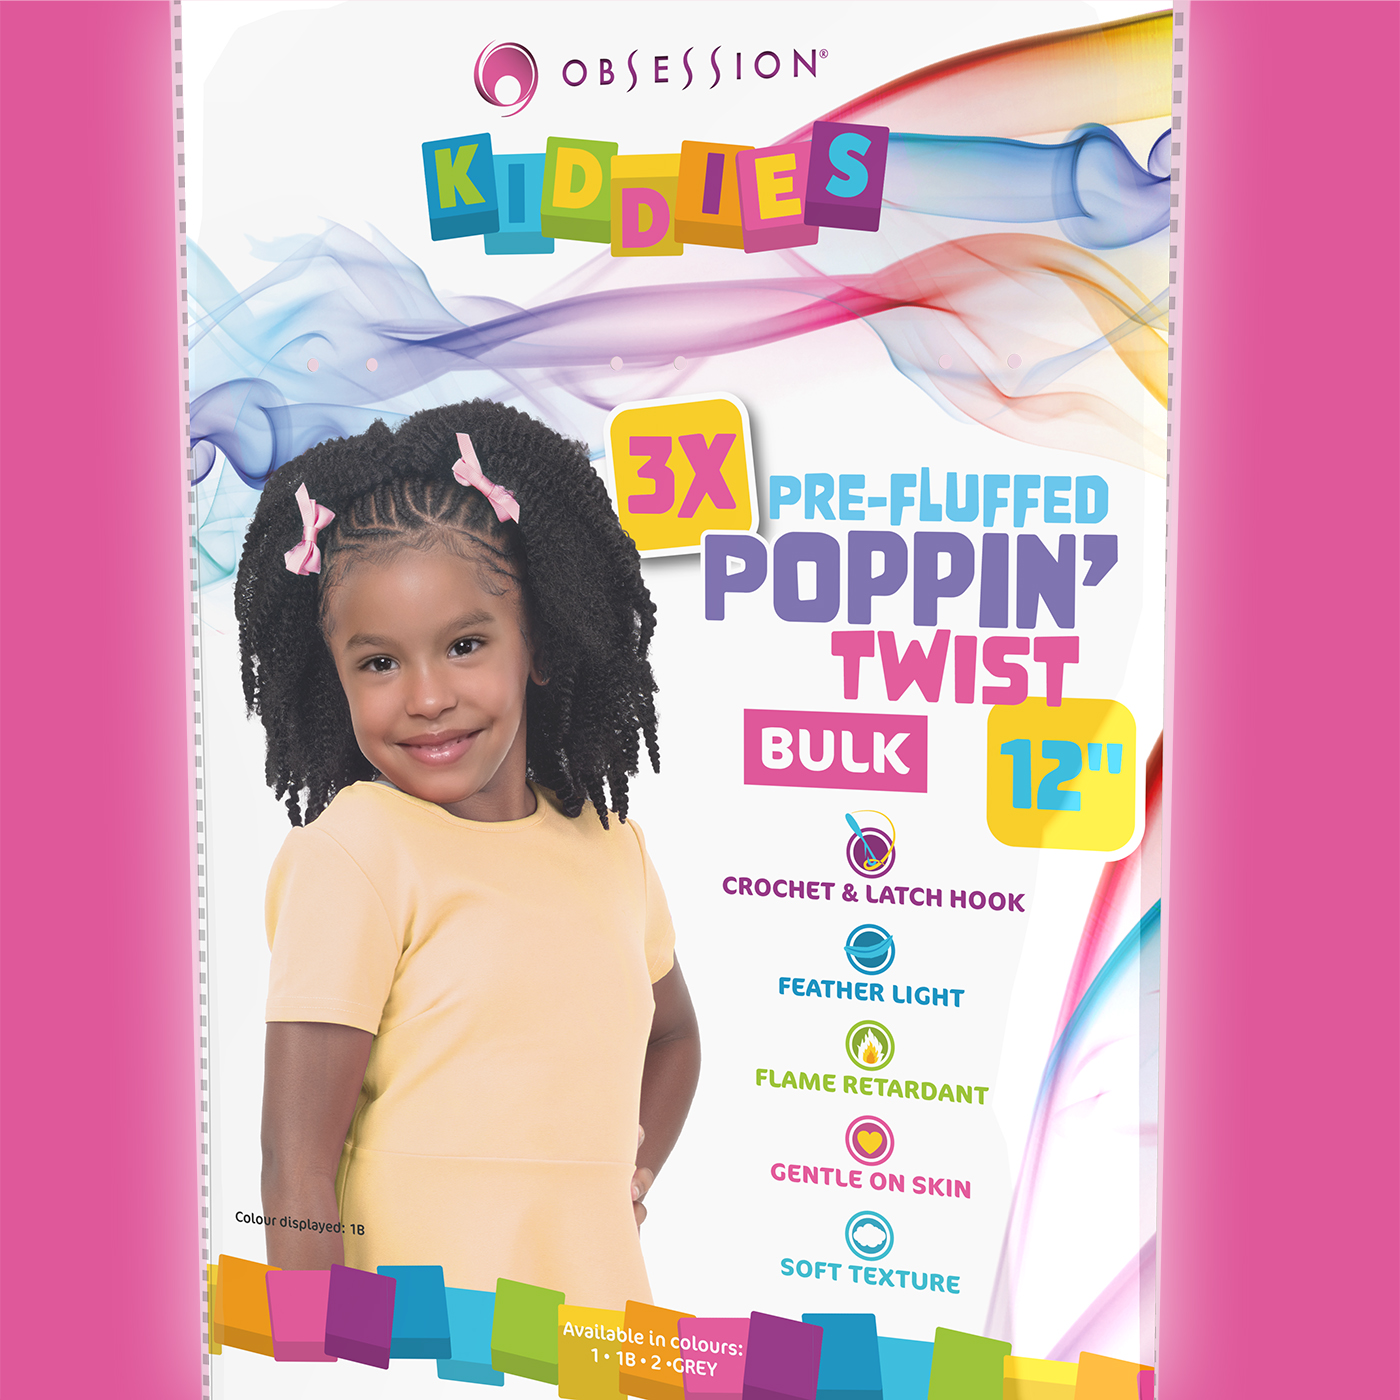 Visual of back of a pack of Obsession kids pre-fluffed poppin twists, showing features and benefits icons as designed by Paul Cartwright Branding.